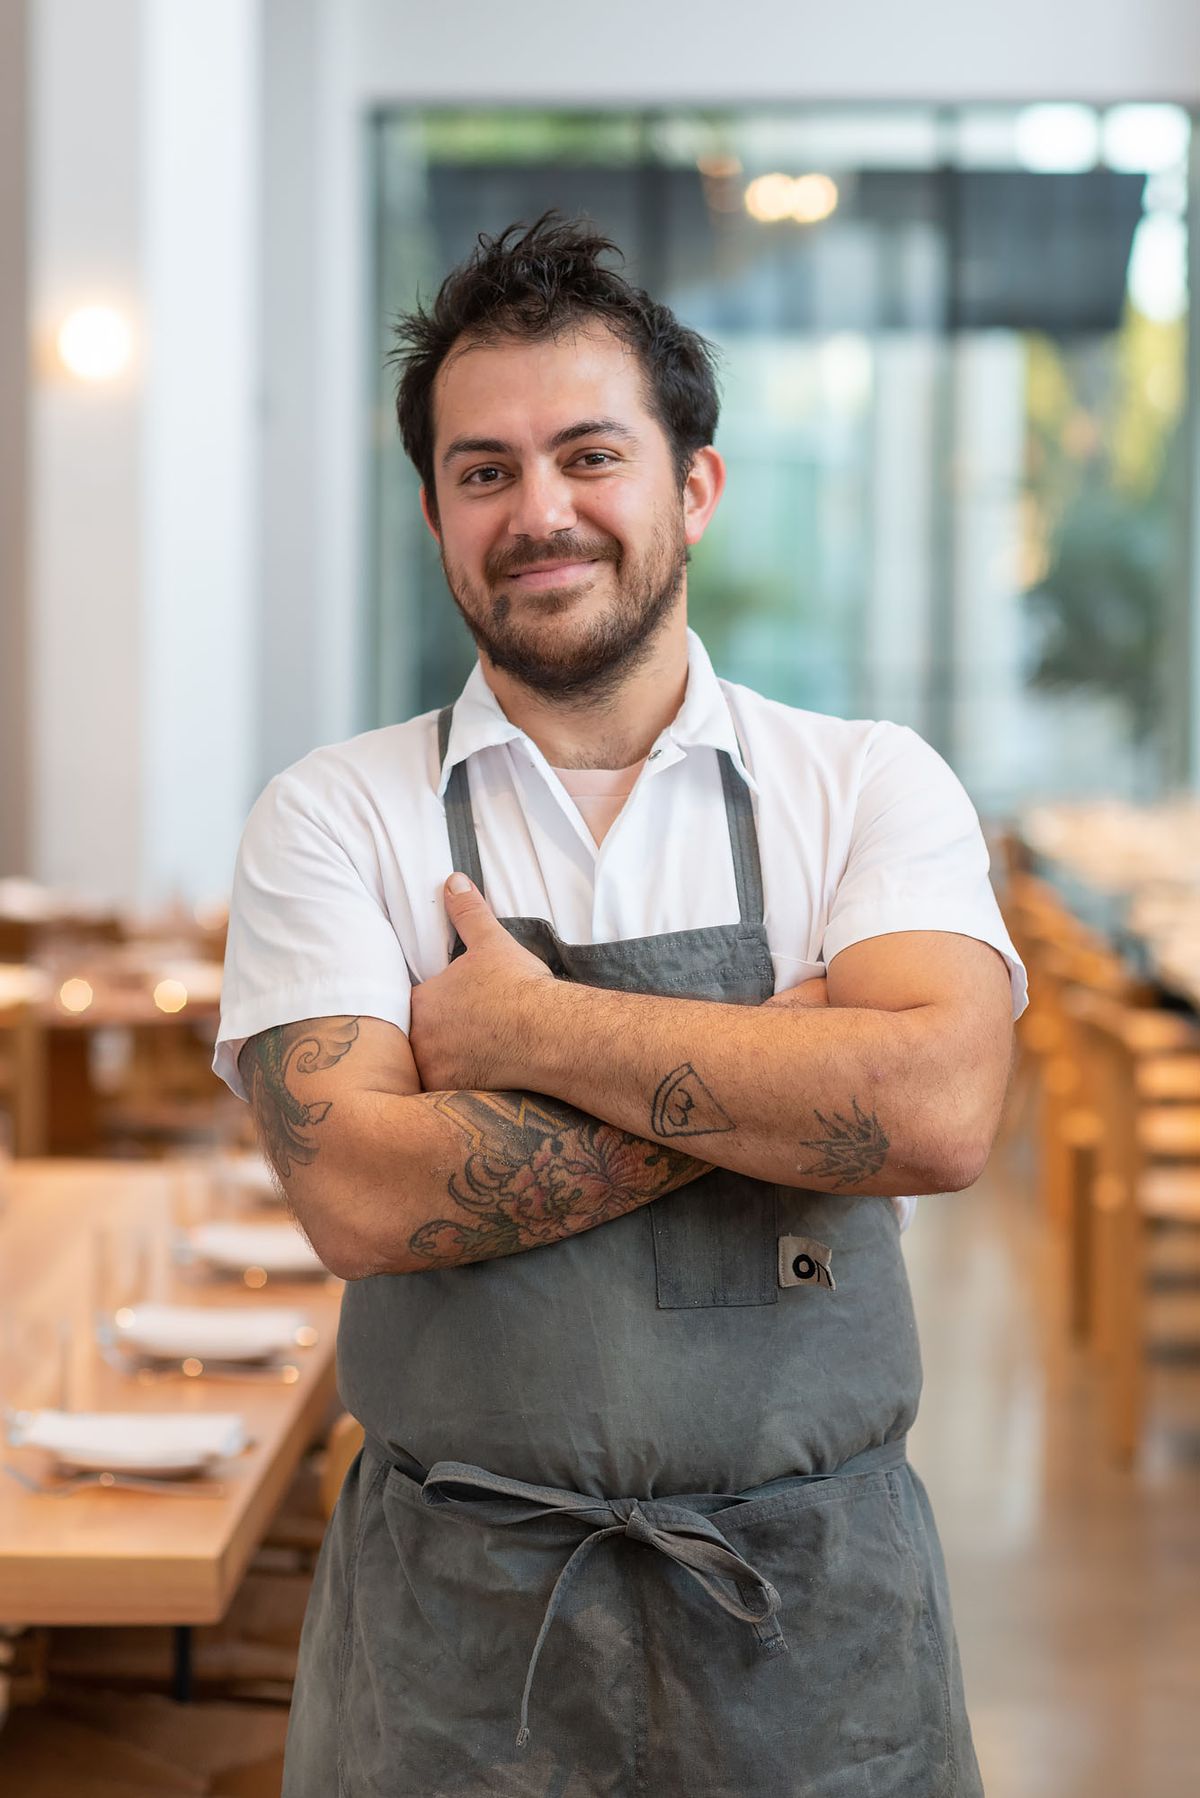 A man in a chef’s apron stands with his arms crossed, smiling.